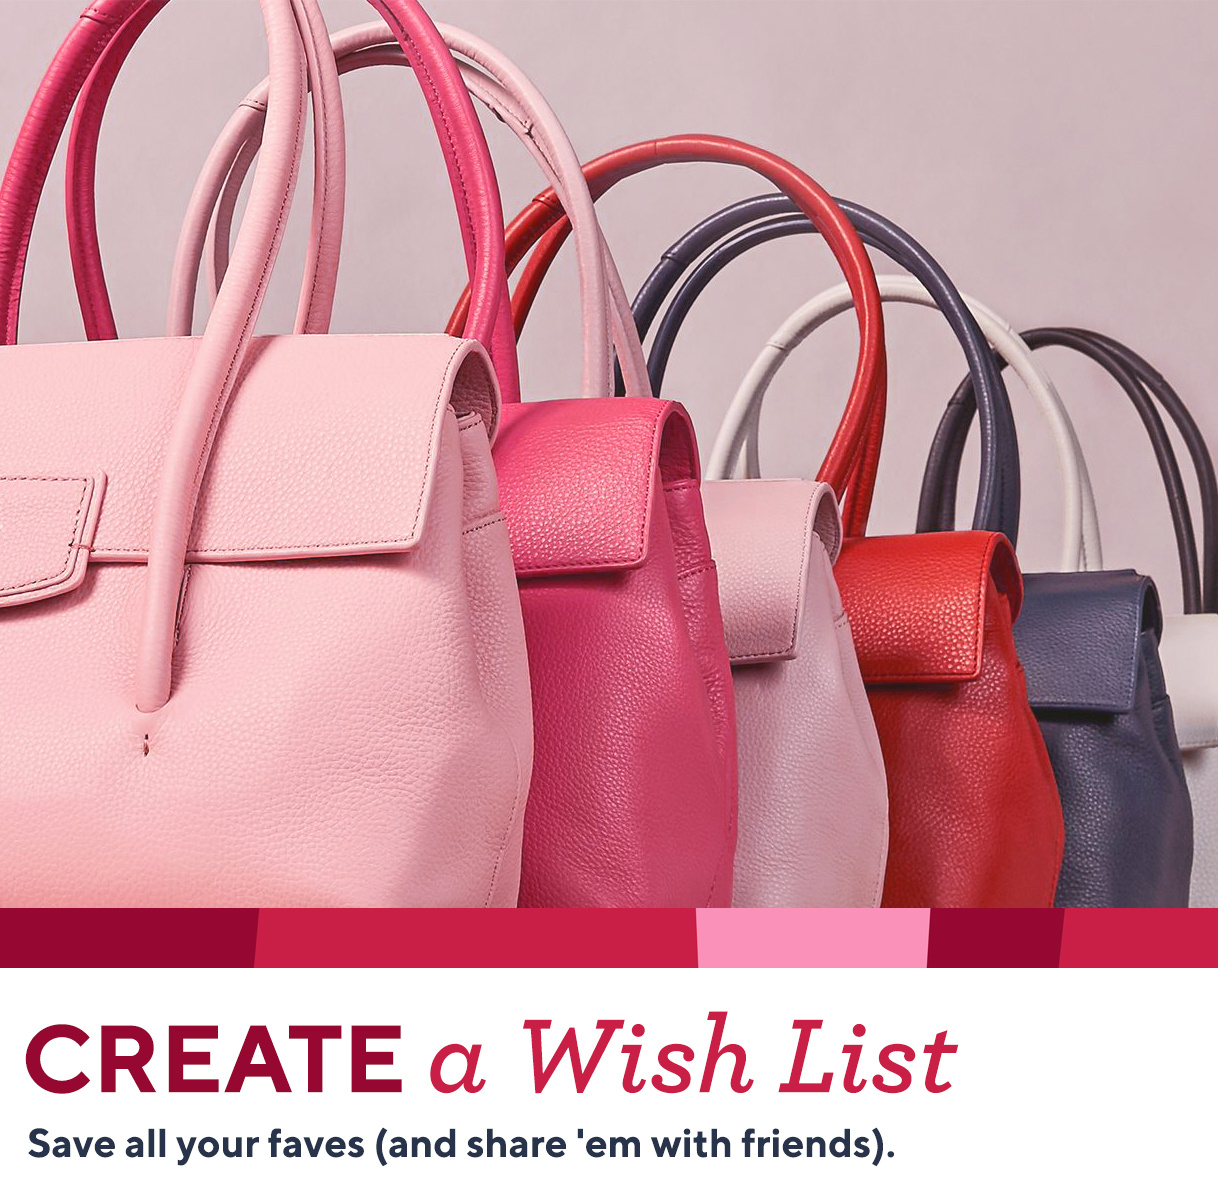 Create a Wish List — Save all your faves (and share 'em with friends).